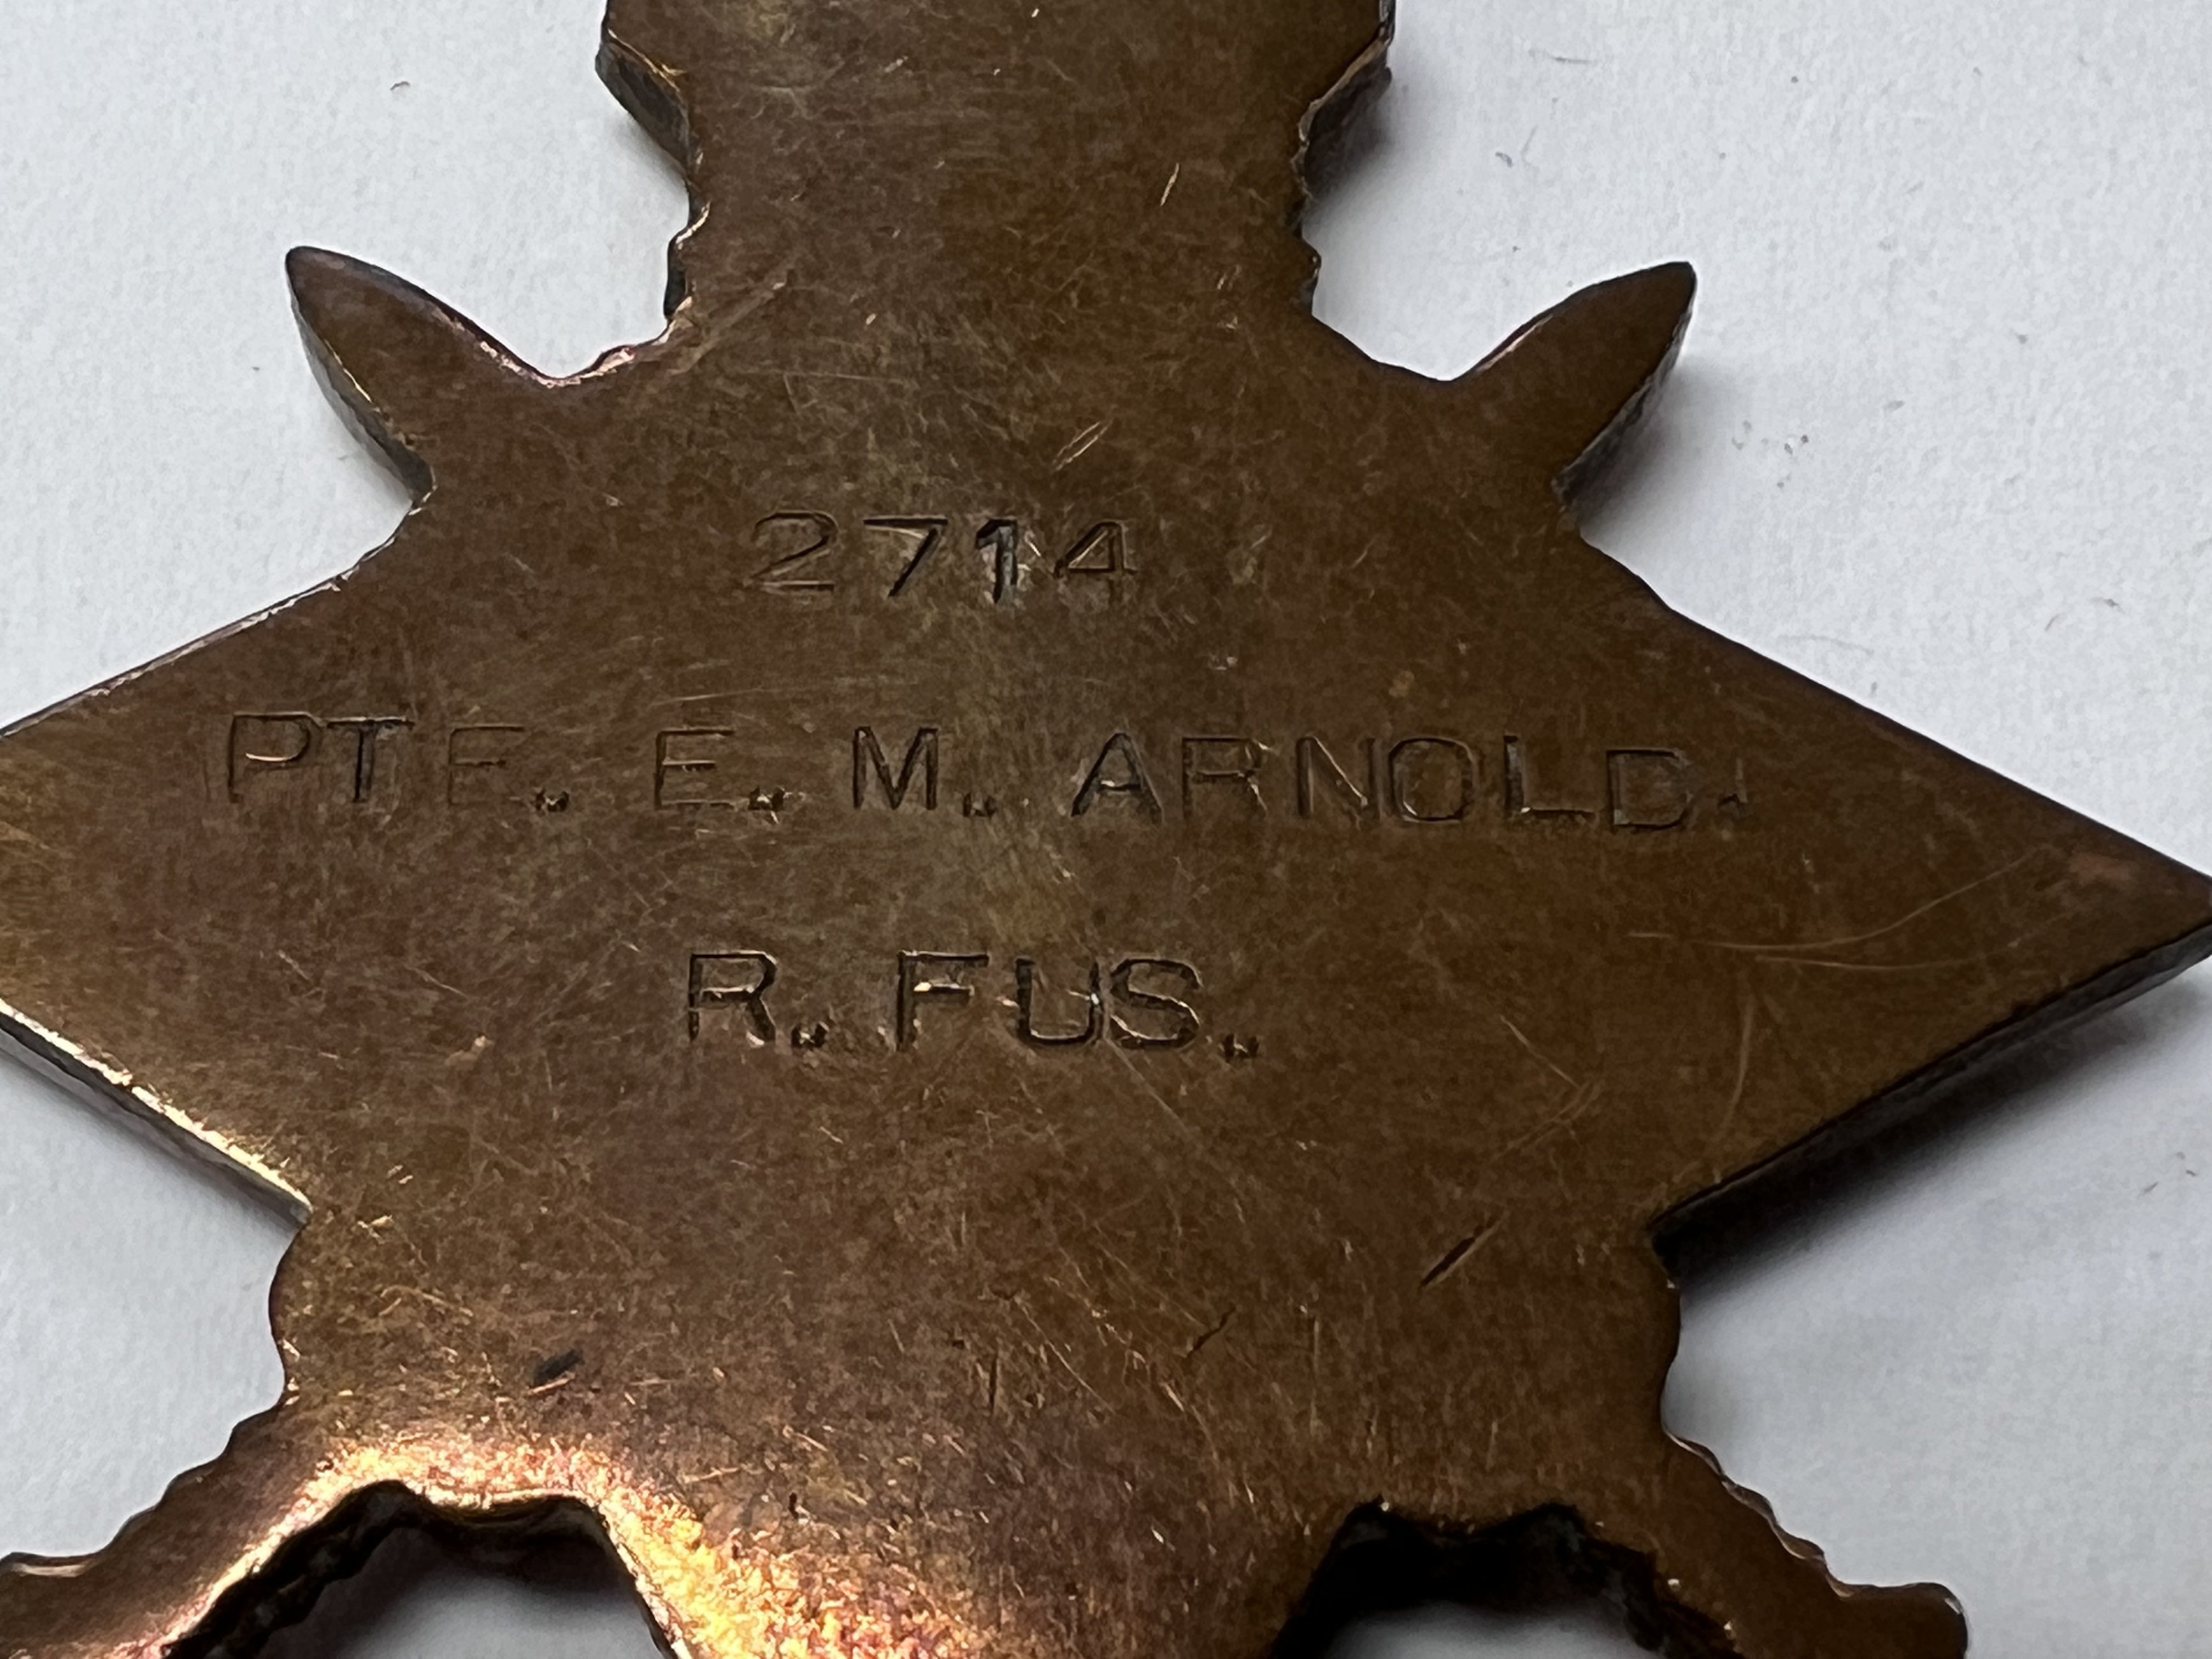 4 WW1 Medal group awarded to Pte E.M Arnold, 2714, - Image 3 of 4